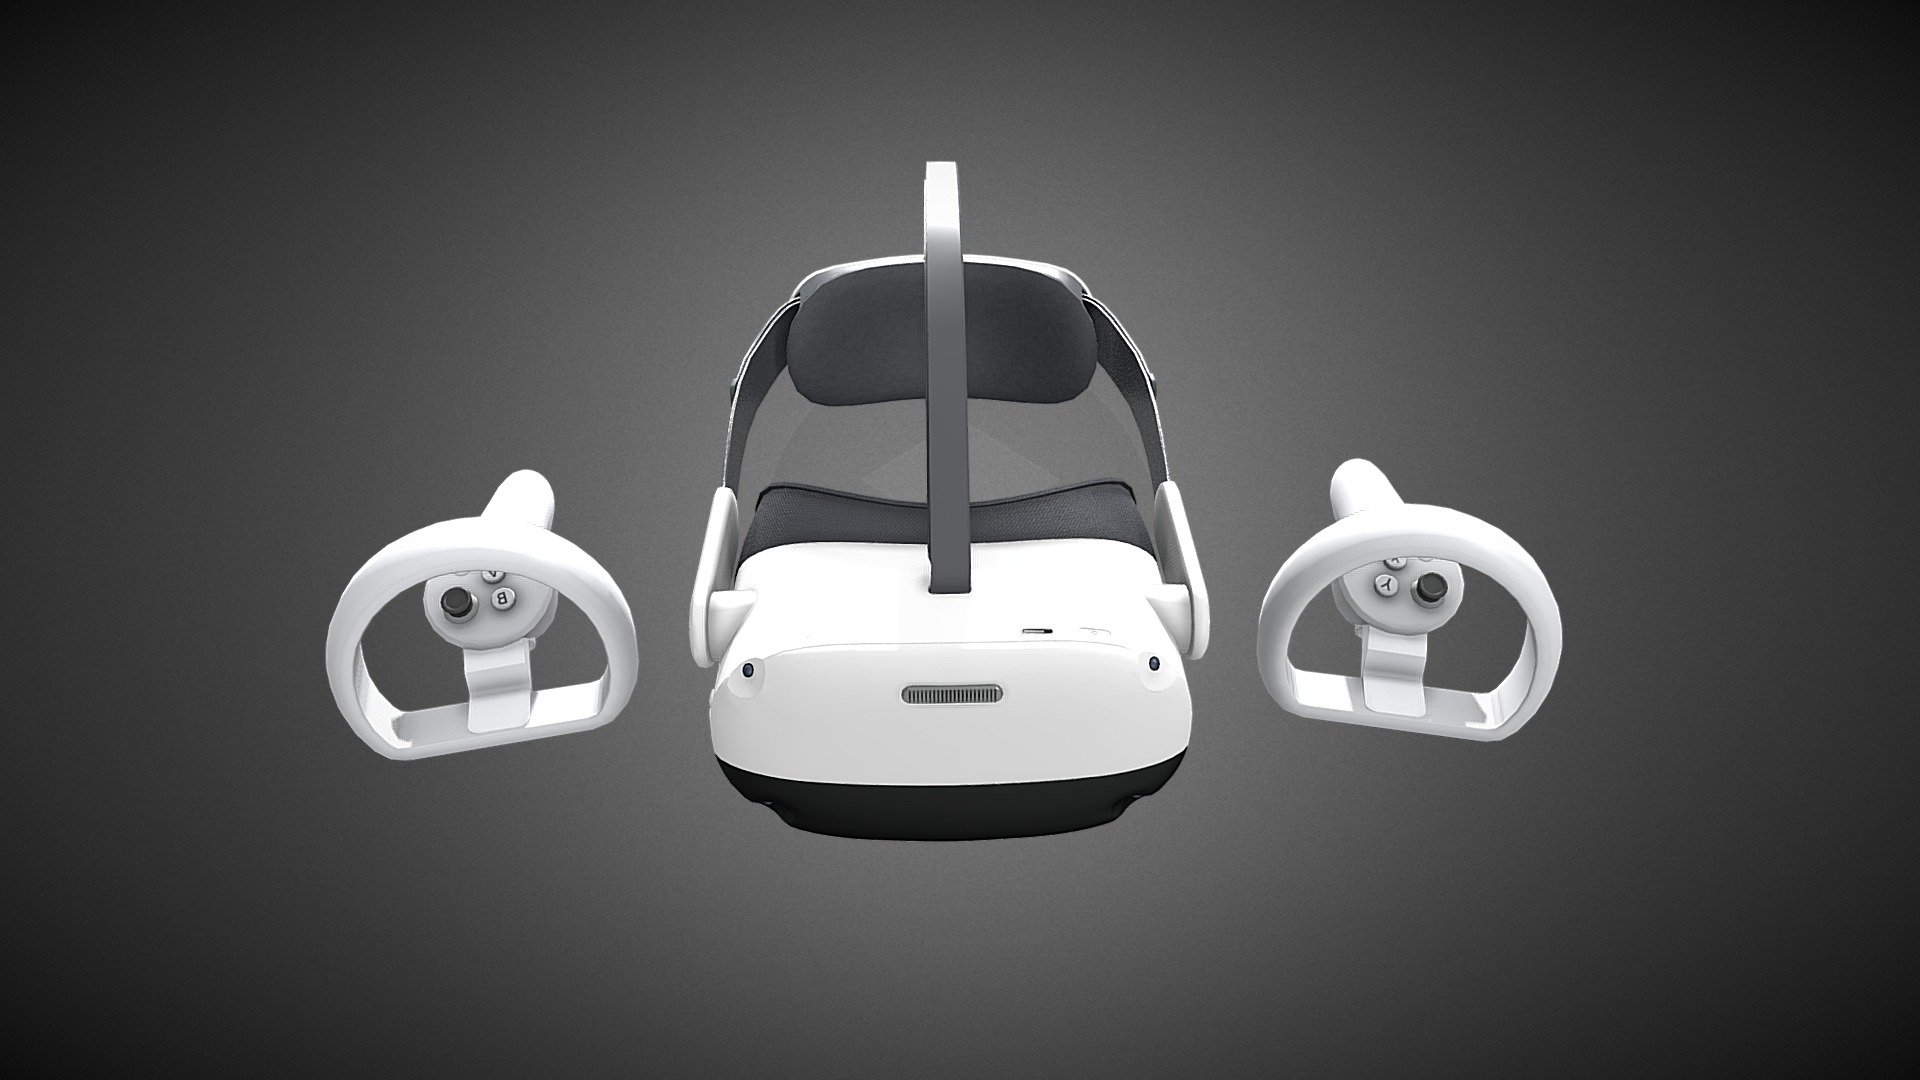 Pico Neo 3 contains low poly 3D models of VR Device with High Quality textures to fill up your game environment. The assets are VR-Ready and game ready.

Total Polygons - 15275

Total Tris - 29949

These models are delivered without any brandings or logos attached. The End users/Buyers are solely responsible for ensuring compliance with any branding or trademark requirements applicable to their specific projects.

For Unity3d (Built-in, URP, HDRP) Ready Assets visit our Unity Asset Store Page

Enjoy and please rate the asset!

Contact us on for AR/VR related queries and development support

Gmail - designer@devdensolutions.com

Website

Instagram

Facebook

Linkedin

Youtube

Buy Pizza - Pico Neo 3 - Buy Royalty Free 3D model by Devden 3d model